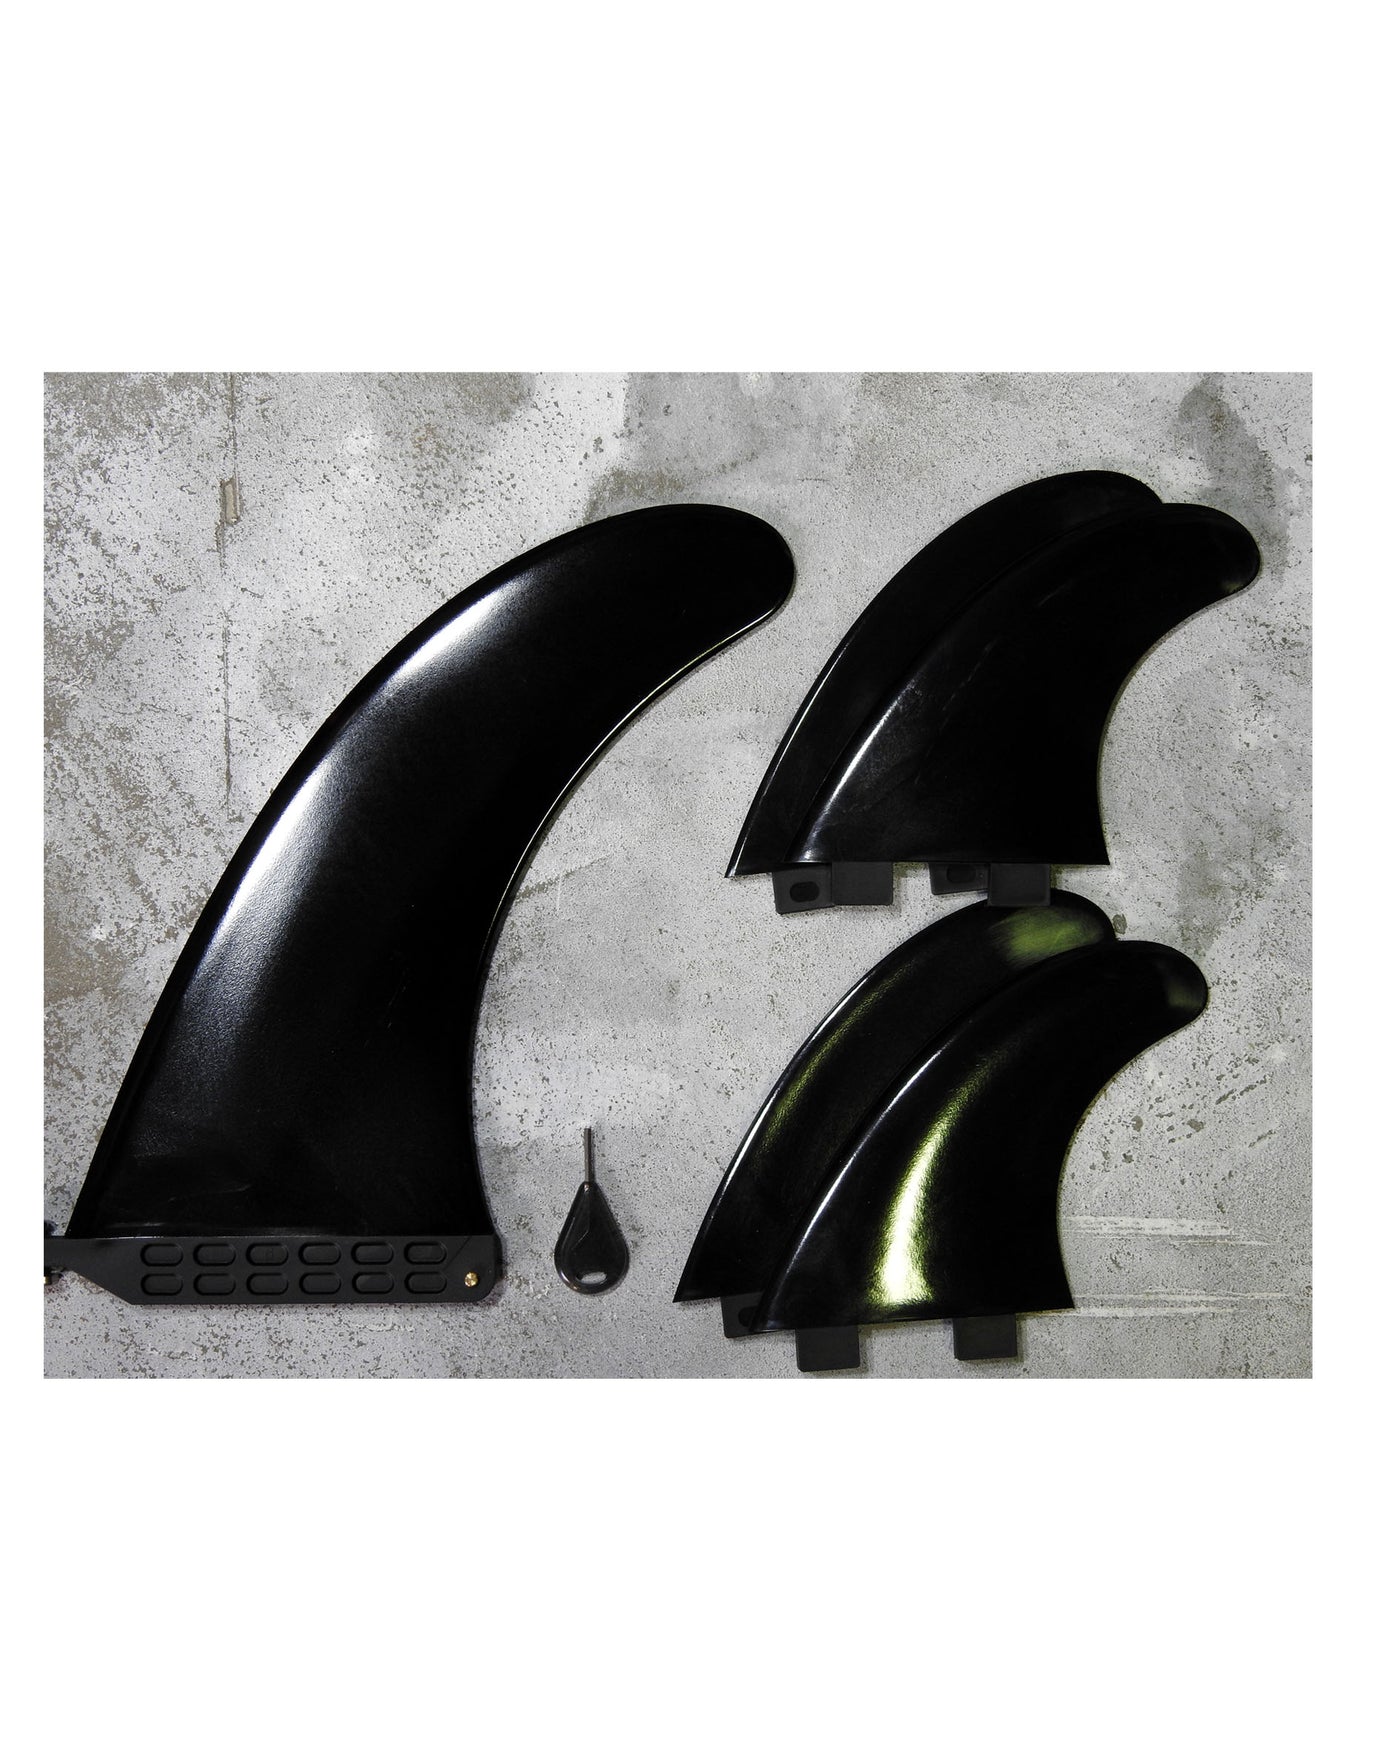 Alleydesigns Fin set 5 pce Center fin + 4 side fins (FREE SHIPPING) - Alleydesigns  Pty Ltd                                             ABN: 44165571264